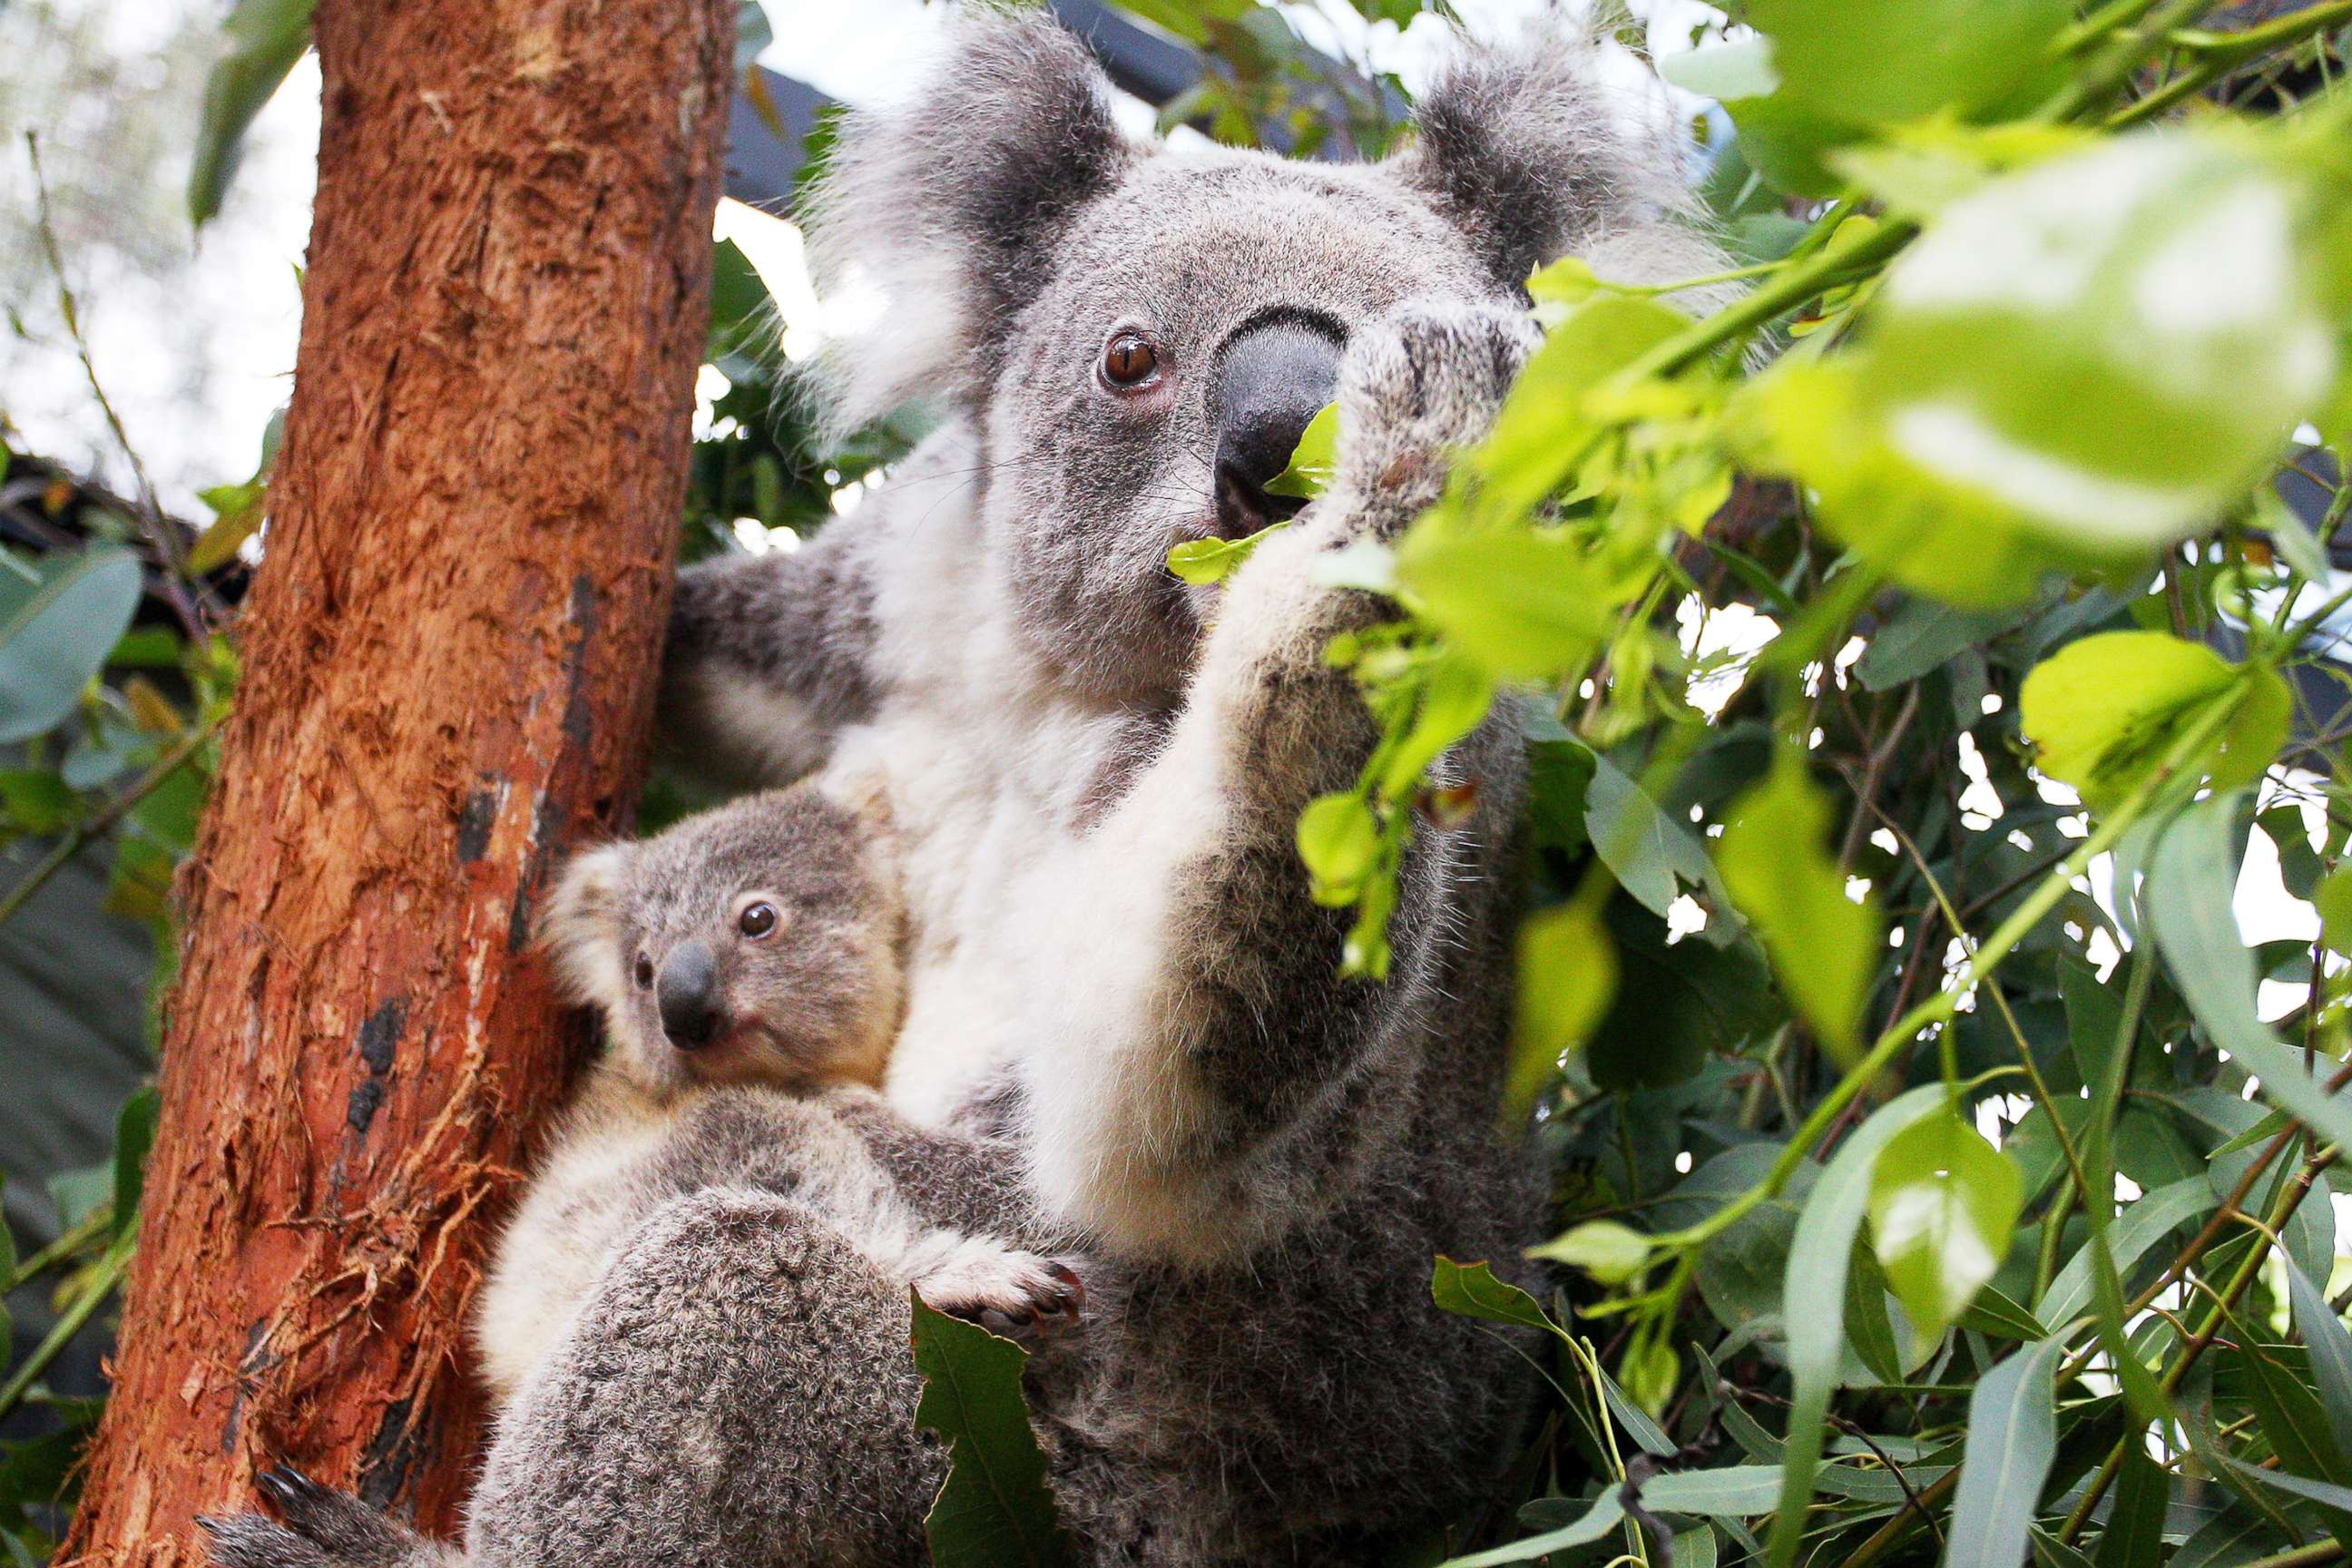 PHOTO: A Koala joey is comforted by its mother in Sydney, Australia, March 2, 2021.